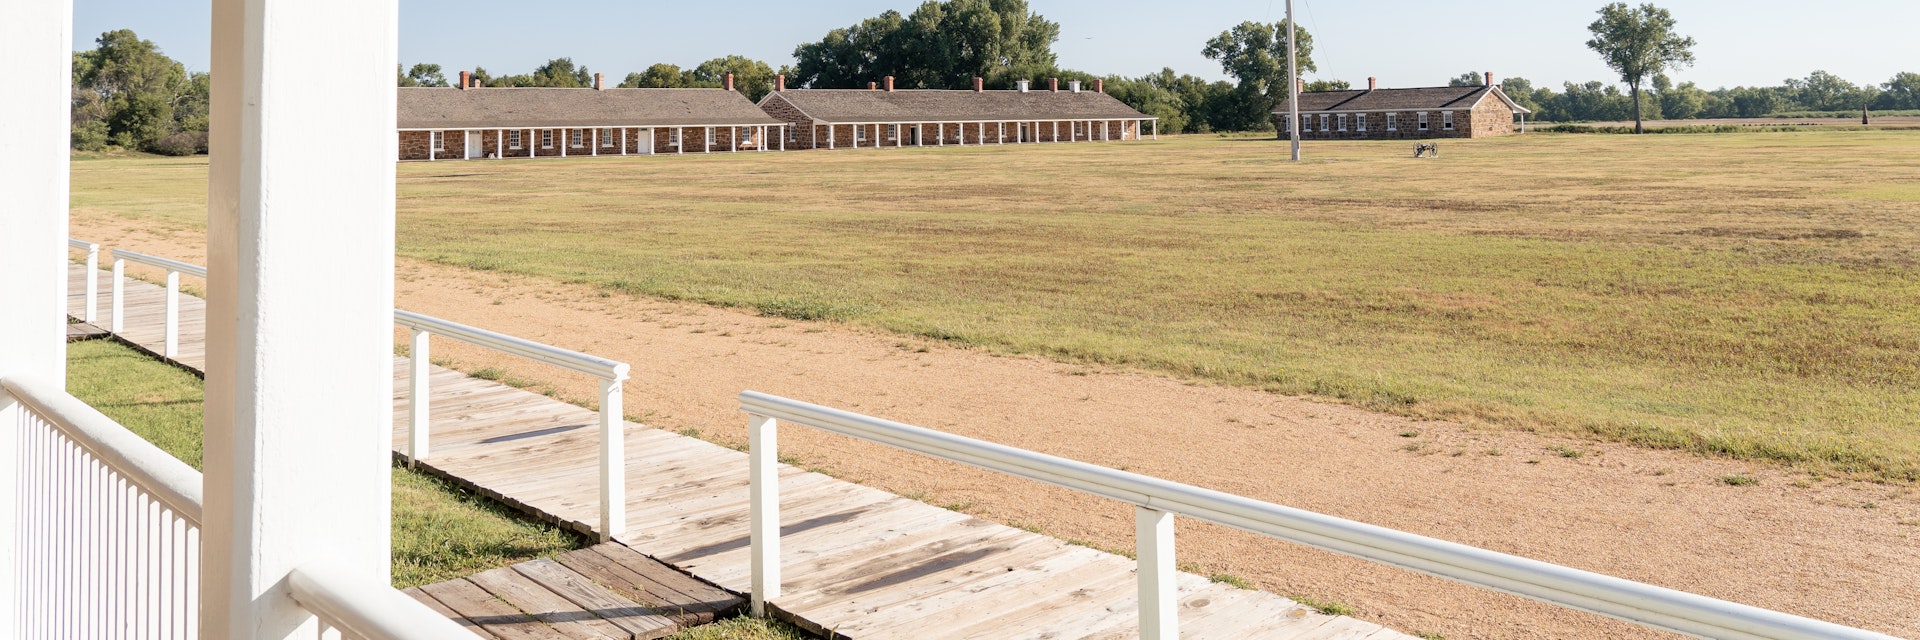 The grounds at Fort Larned National Historic Site.